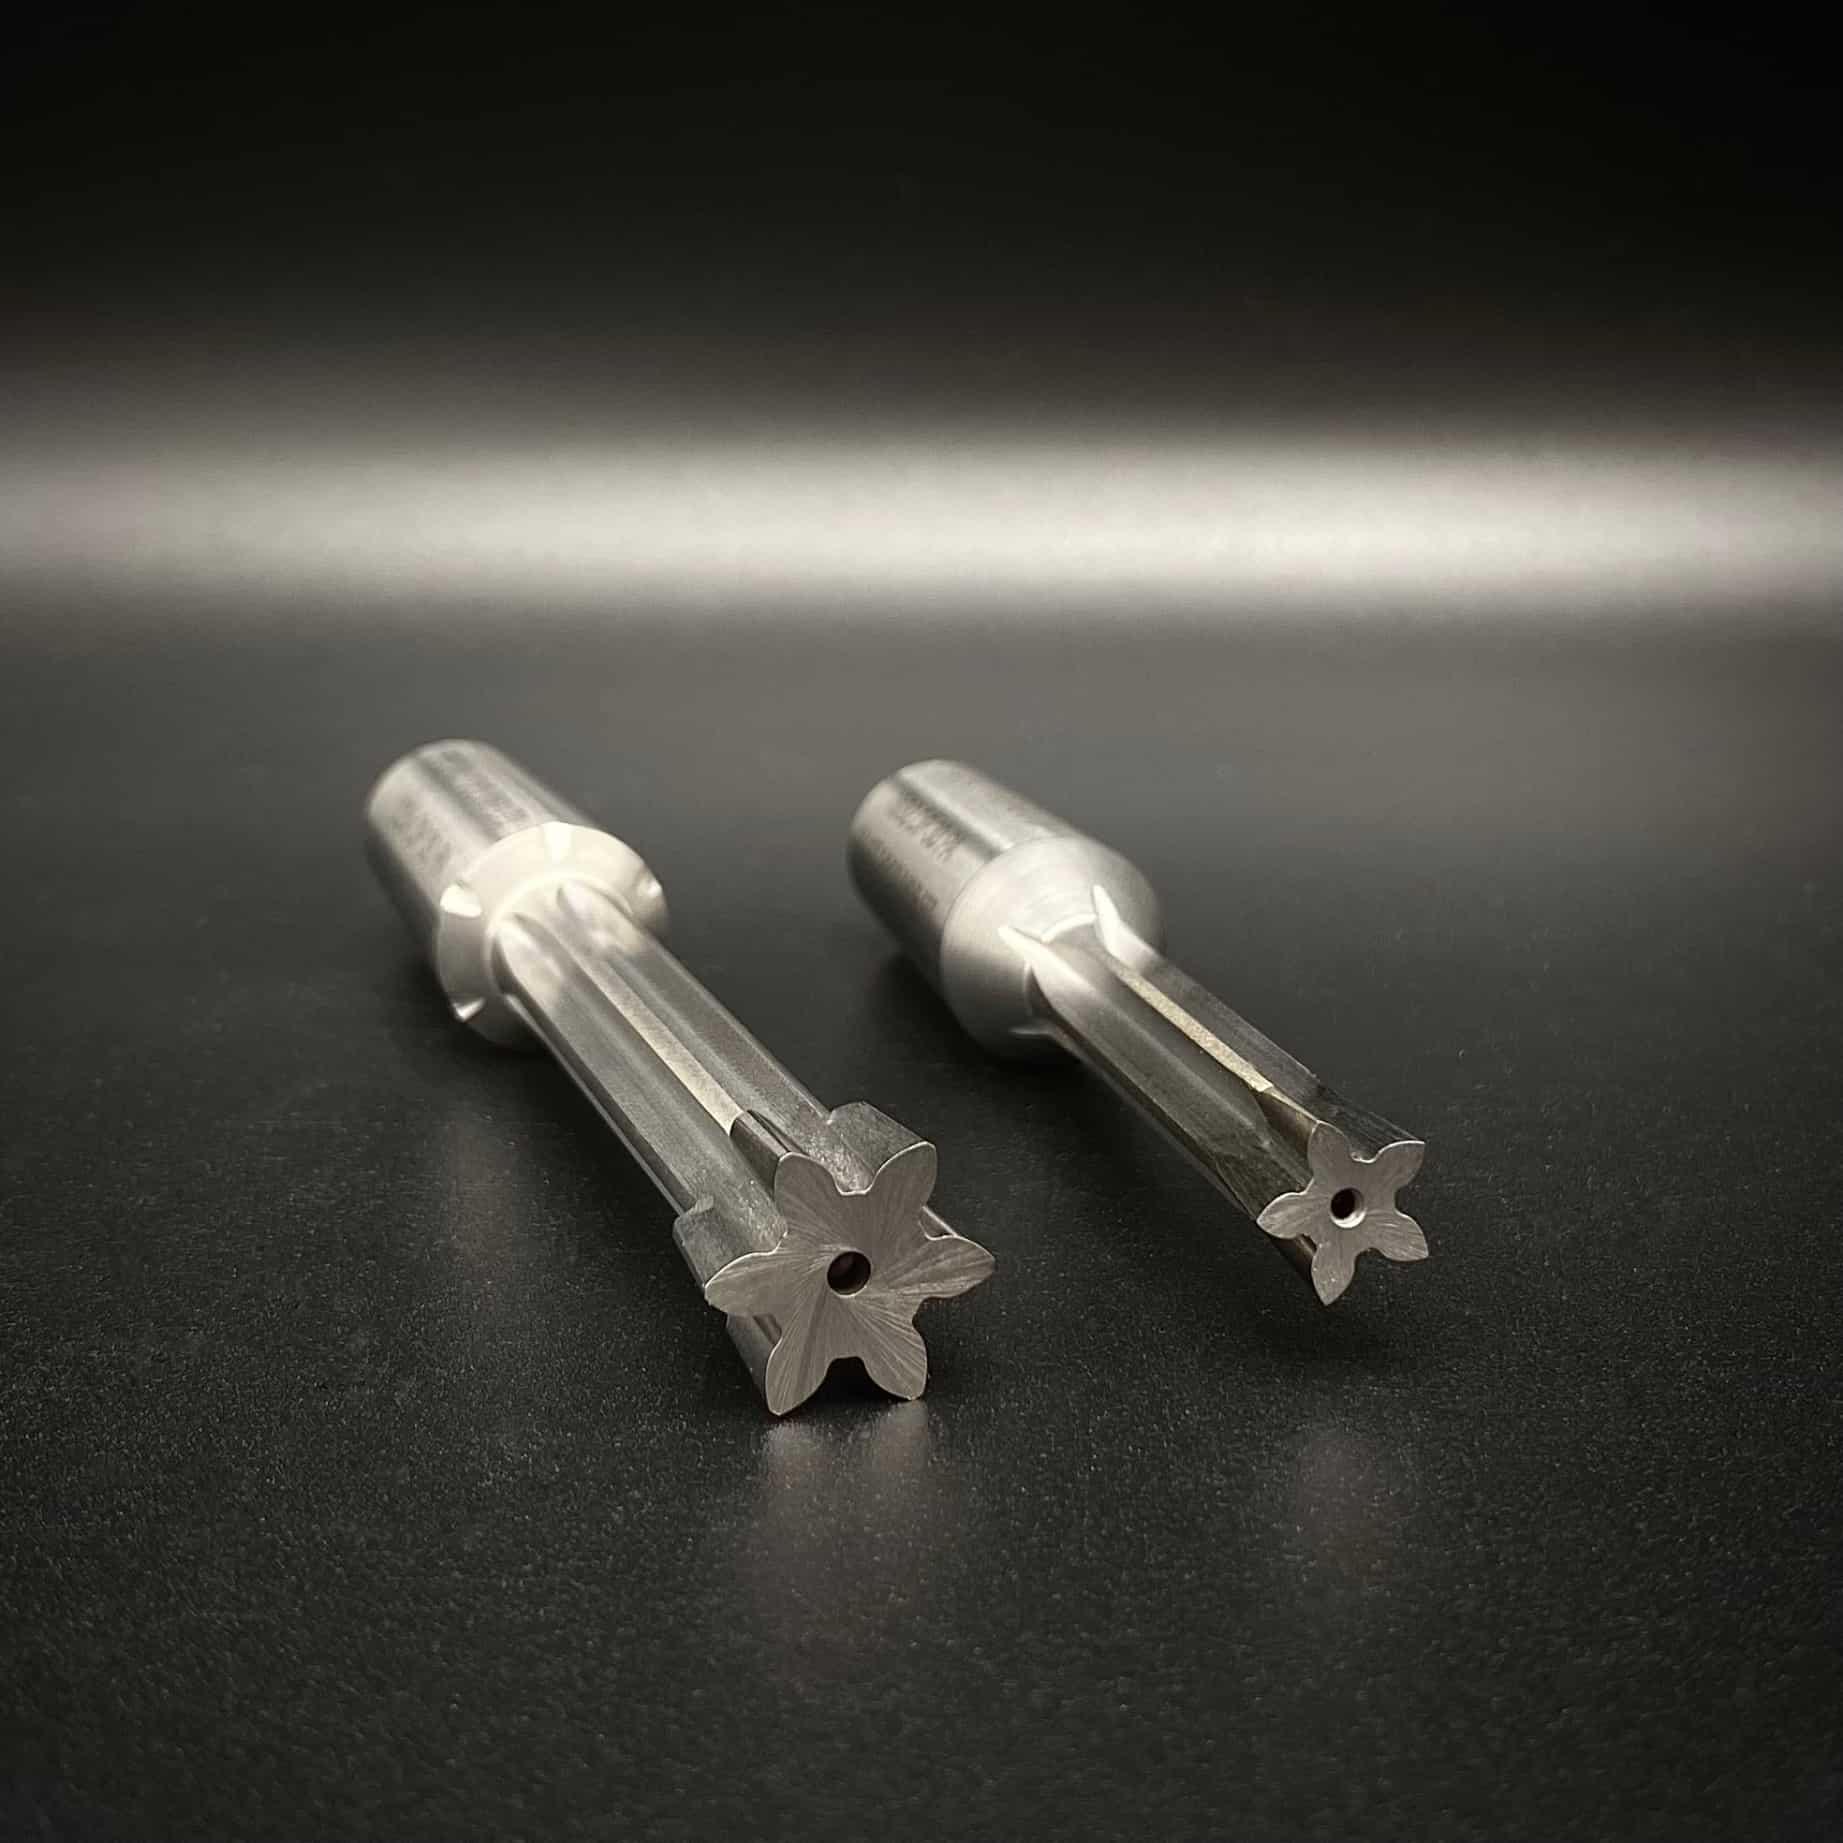 Shank Cutters showing the ends manufactured by Special Tooling